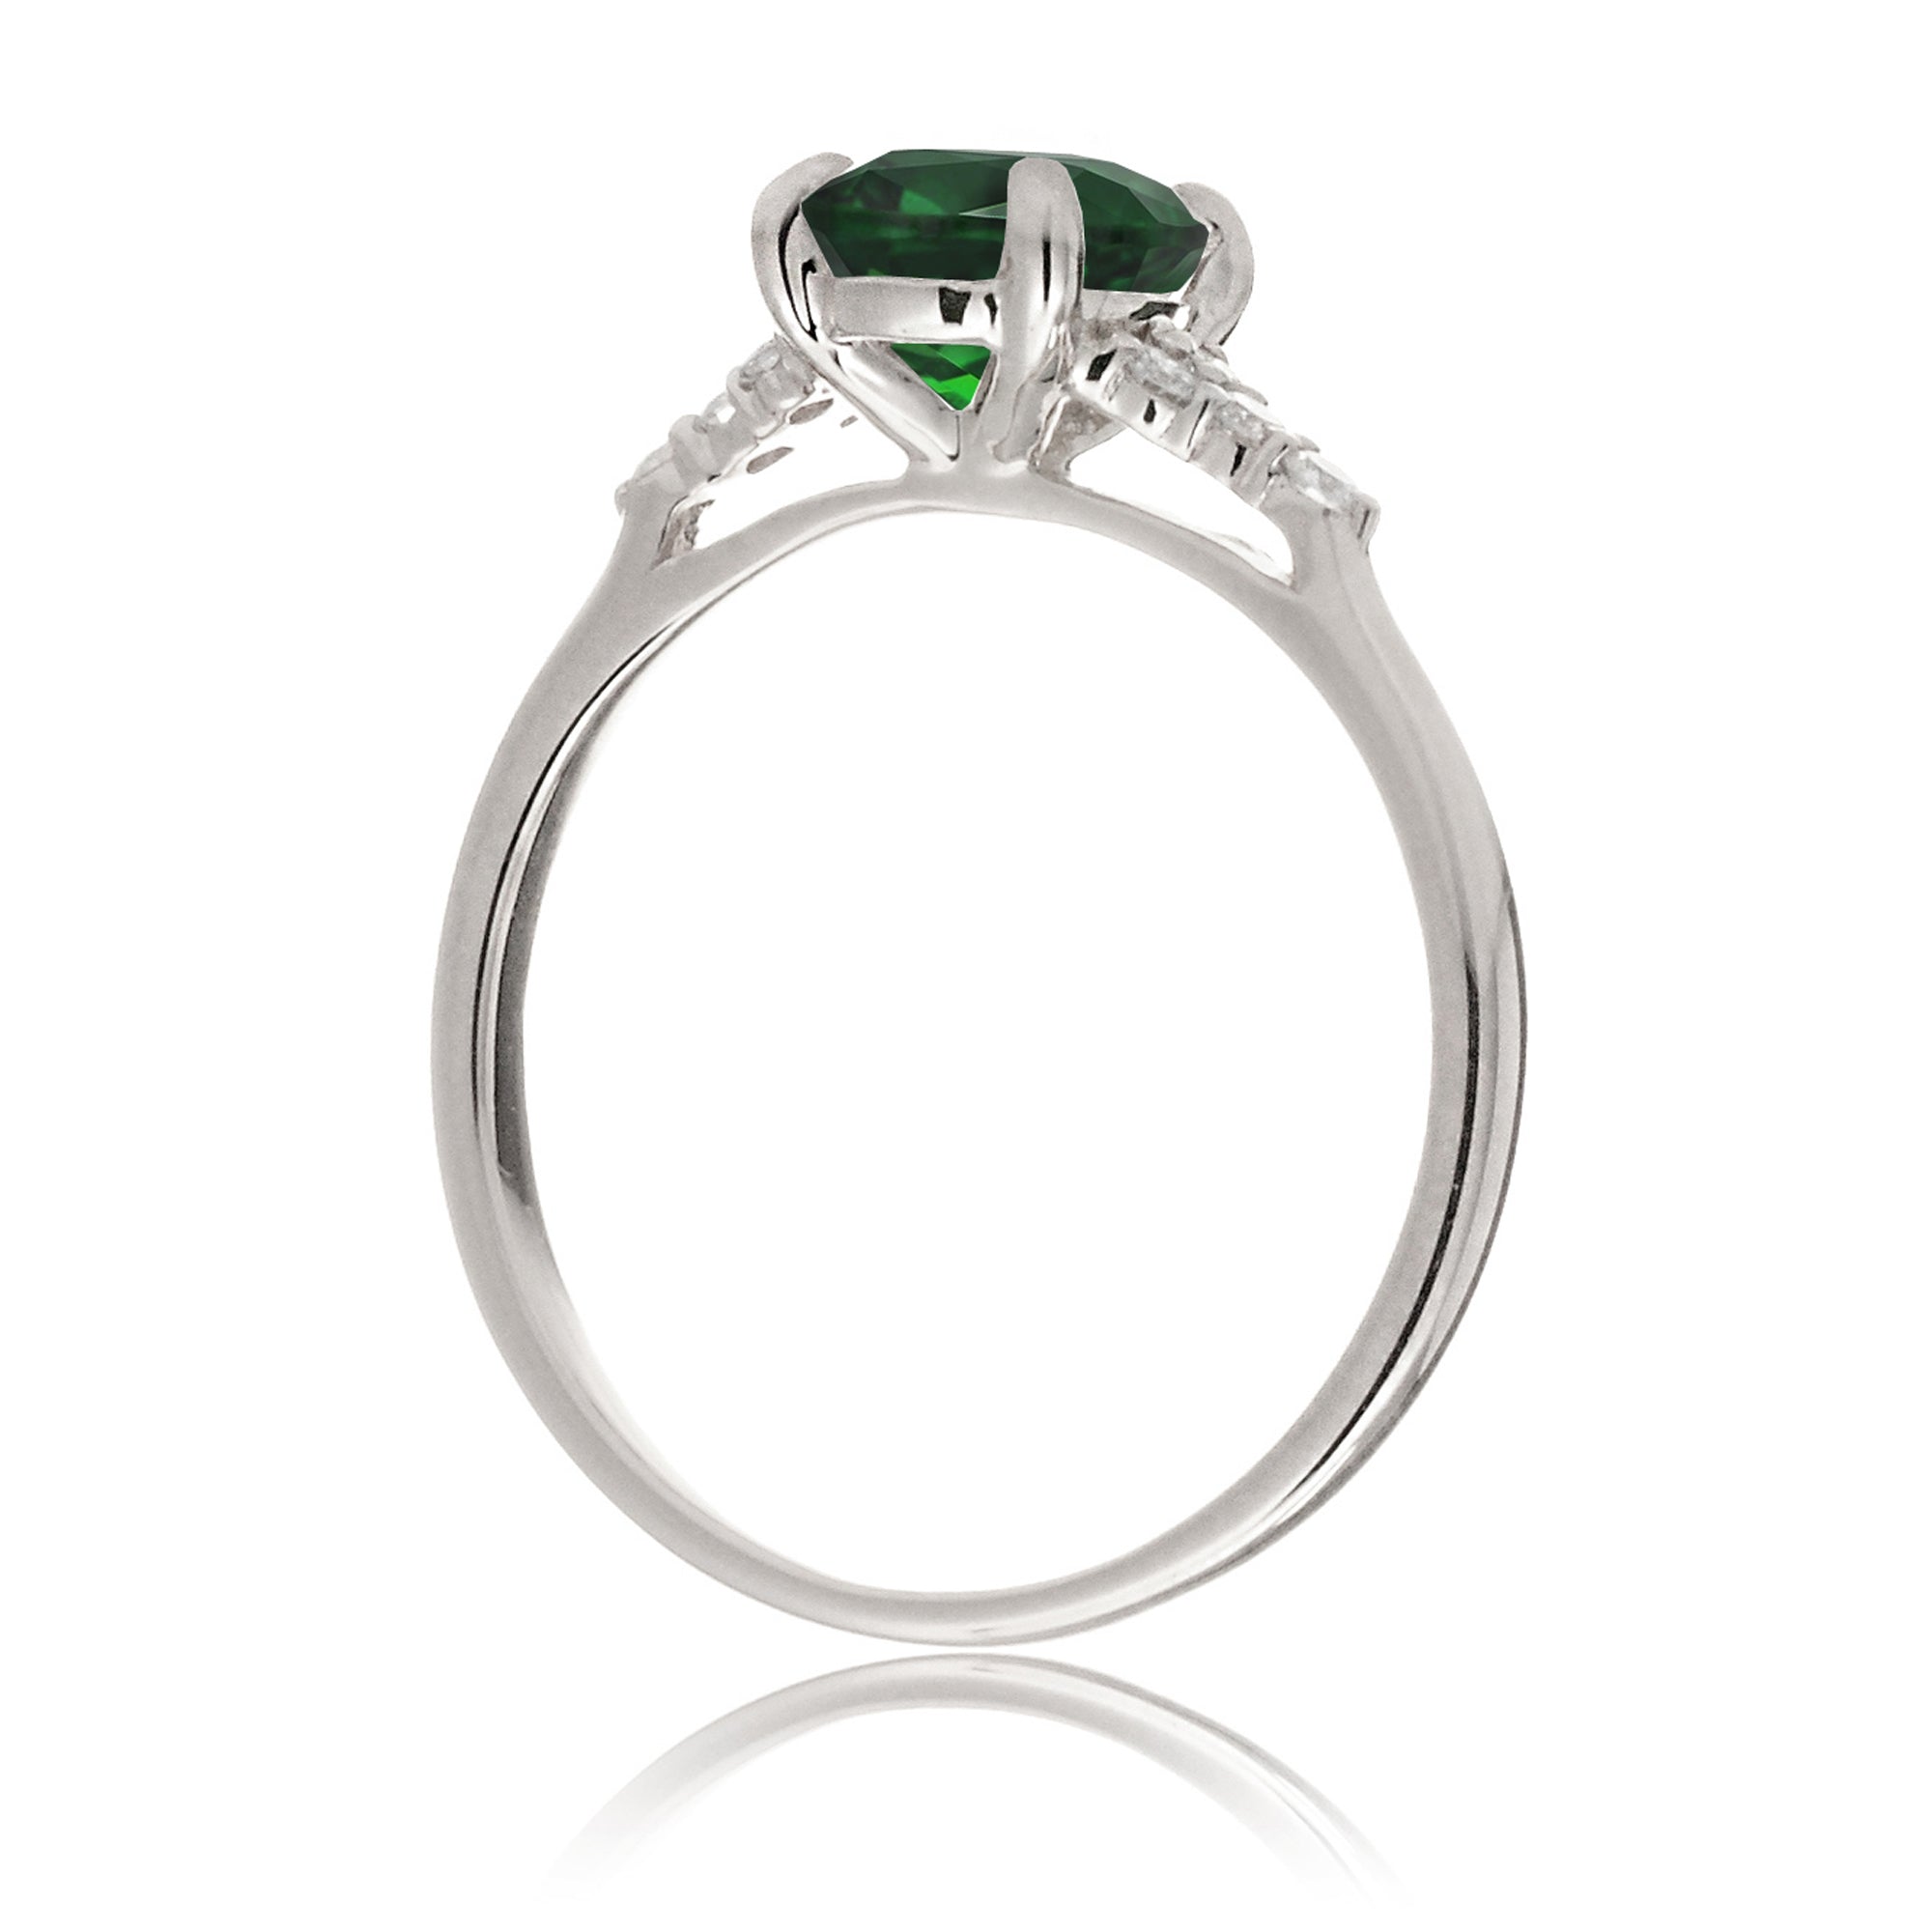 Pear cut emerald and diamond engagement ring in white gold - the Chloe lab-grown